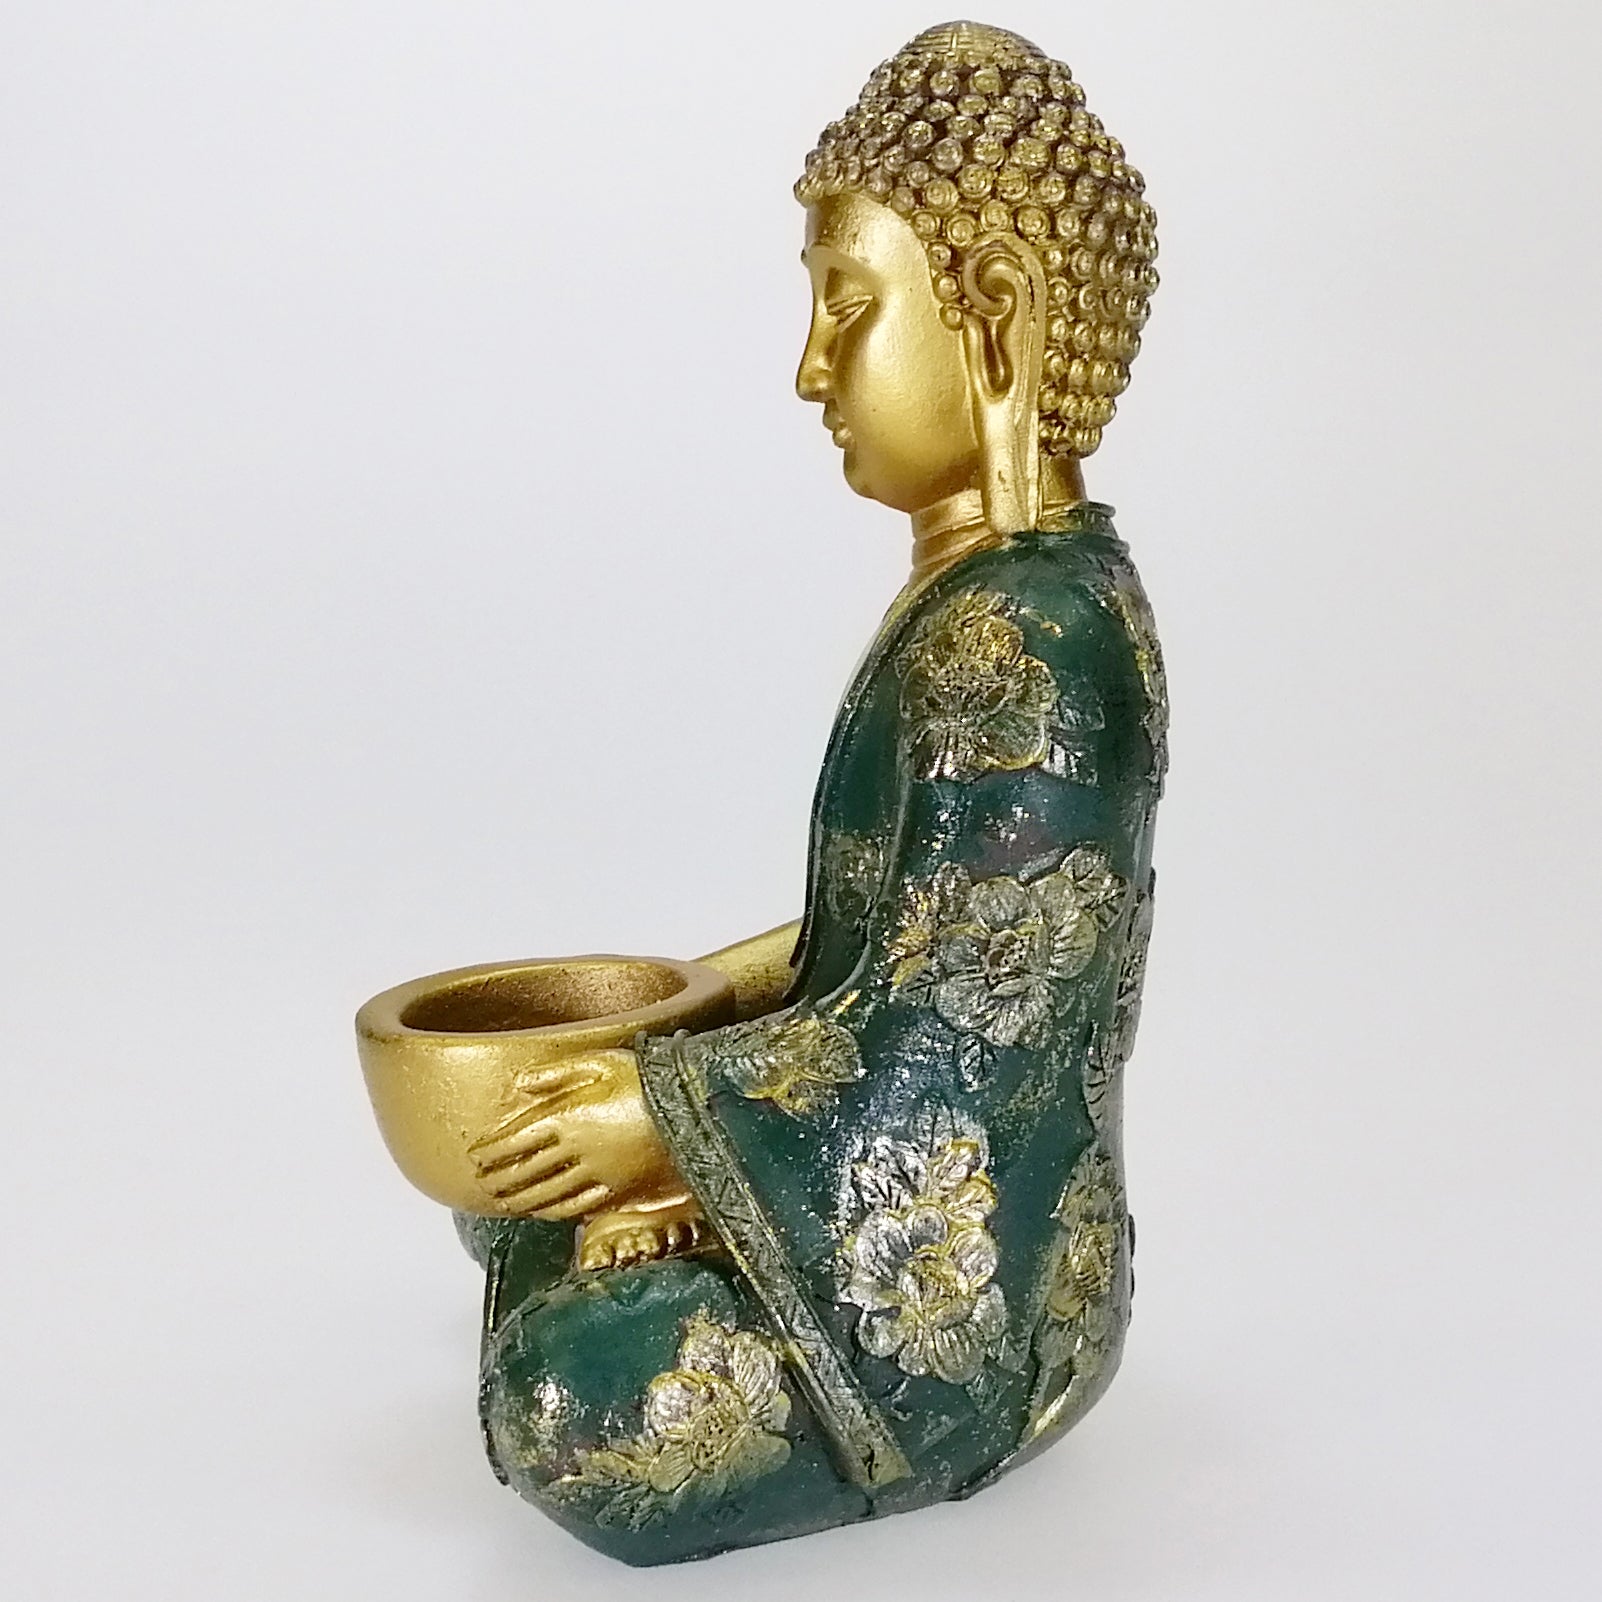 Buddha Candle Holder - Painted Green and Gold